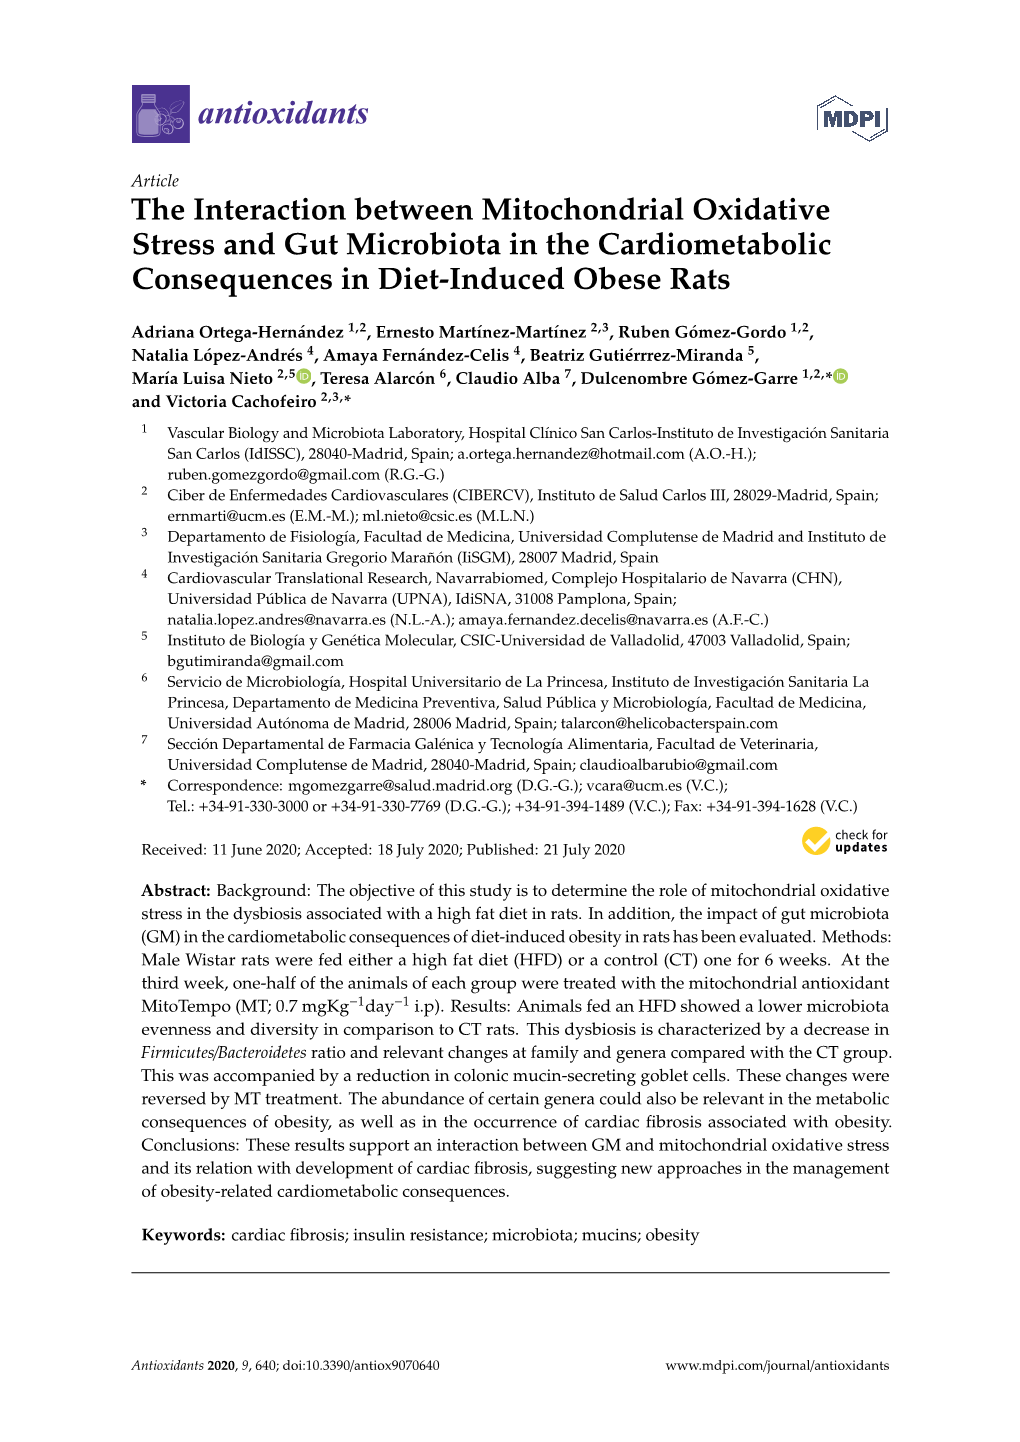 The Interaction Between Mitochondrial Oxidative Stress and Gut Microbiota in the Cardiometabolic Consequences in Diet-Induced Obese Rats